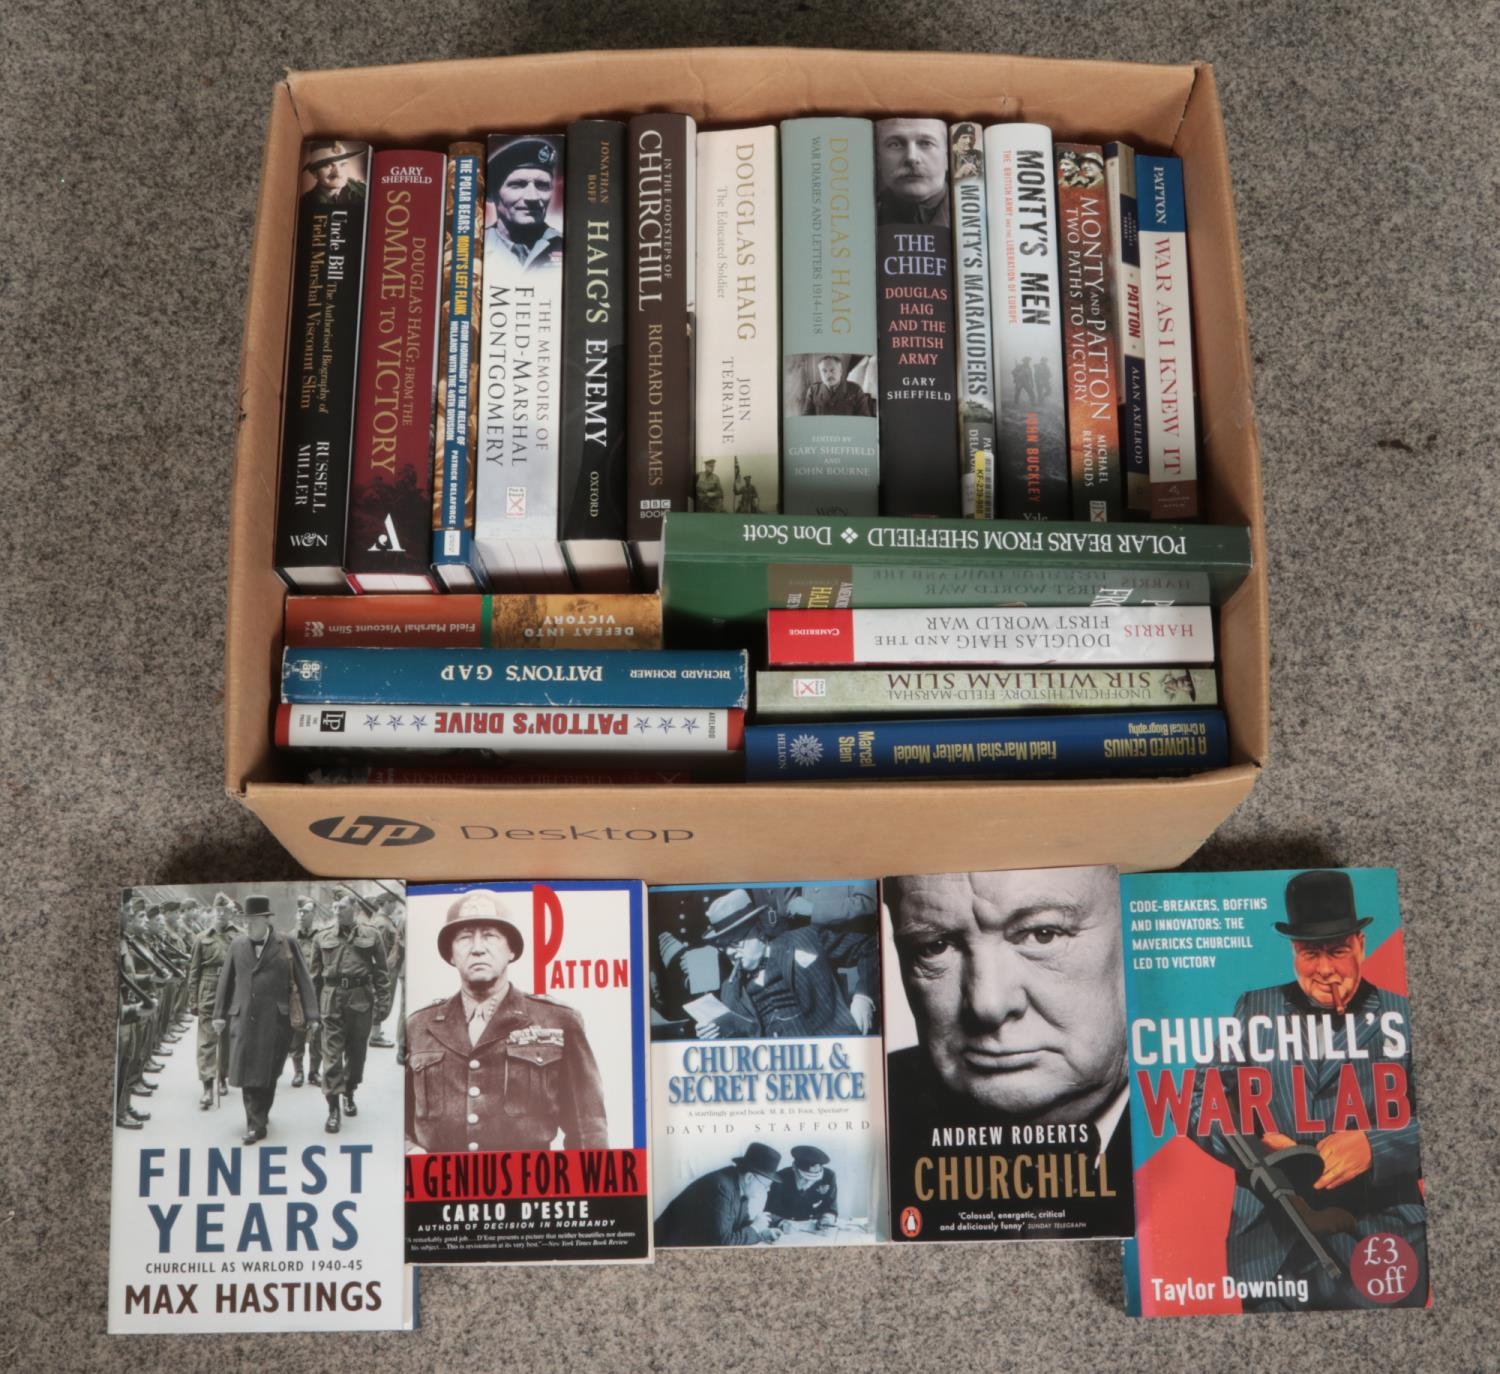 A collection of hardback and paperback books focusing on key figures across both World Wars. To